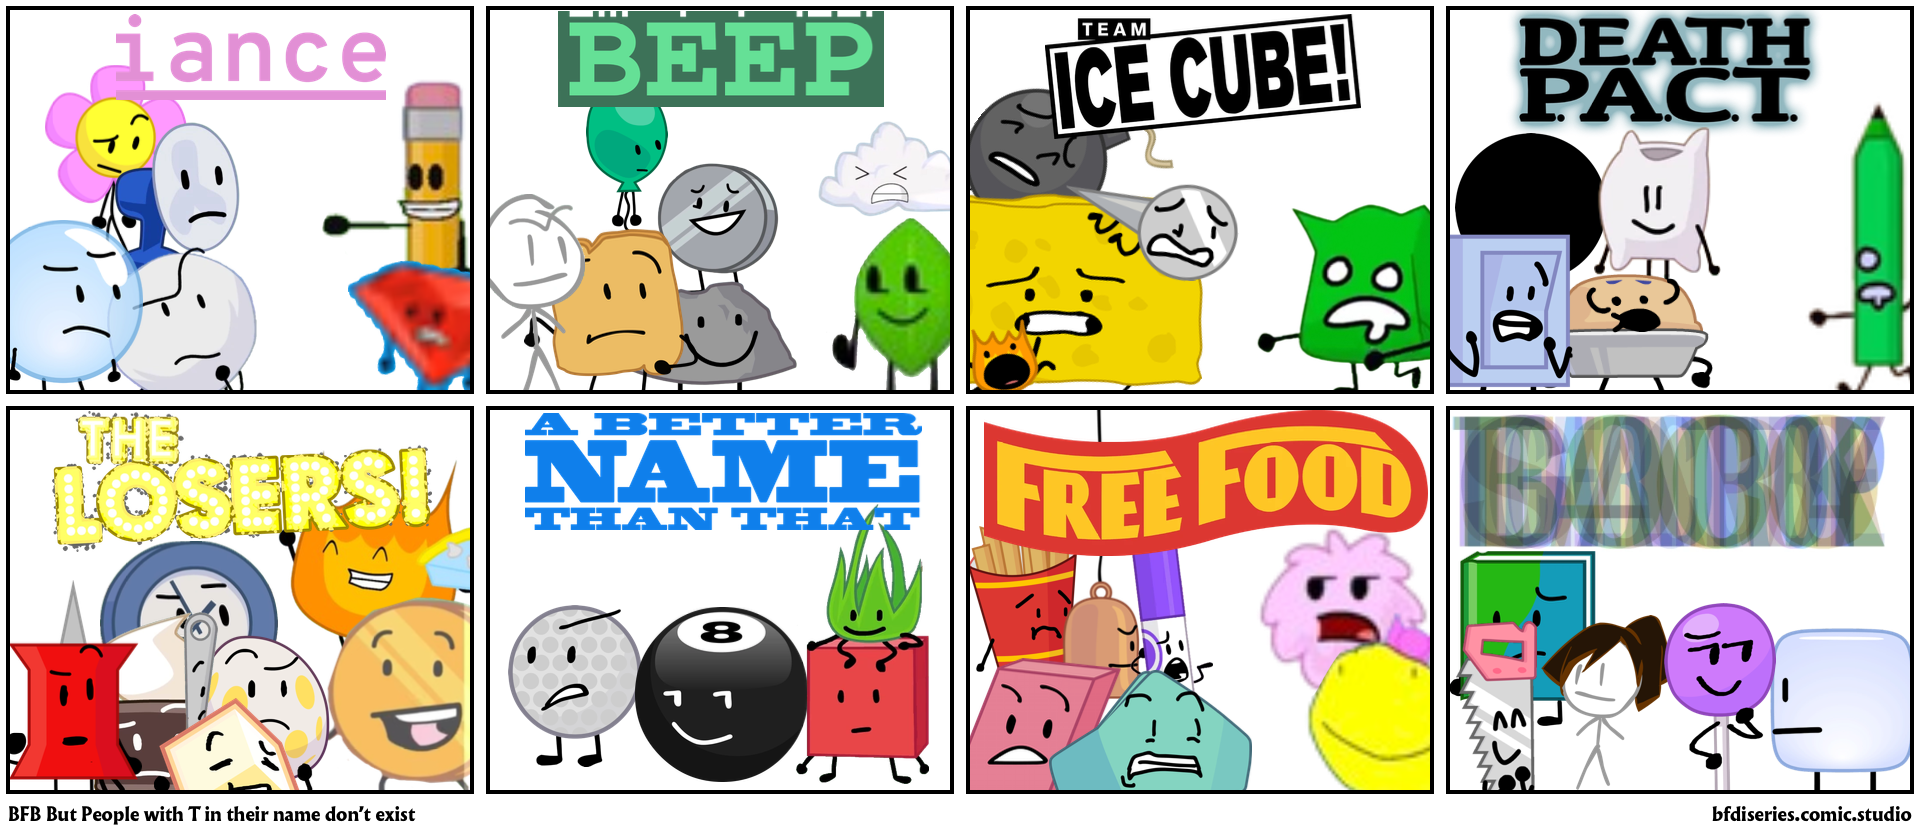 BFB But People with T in their name don’t exist